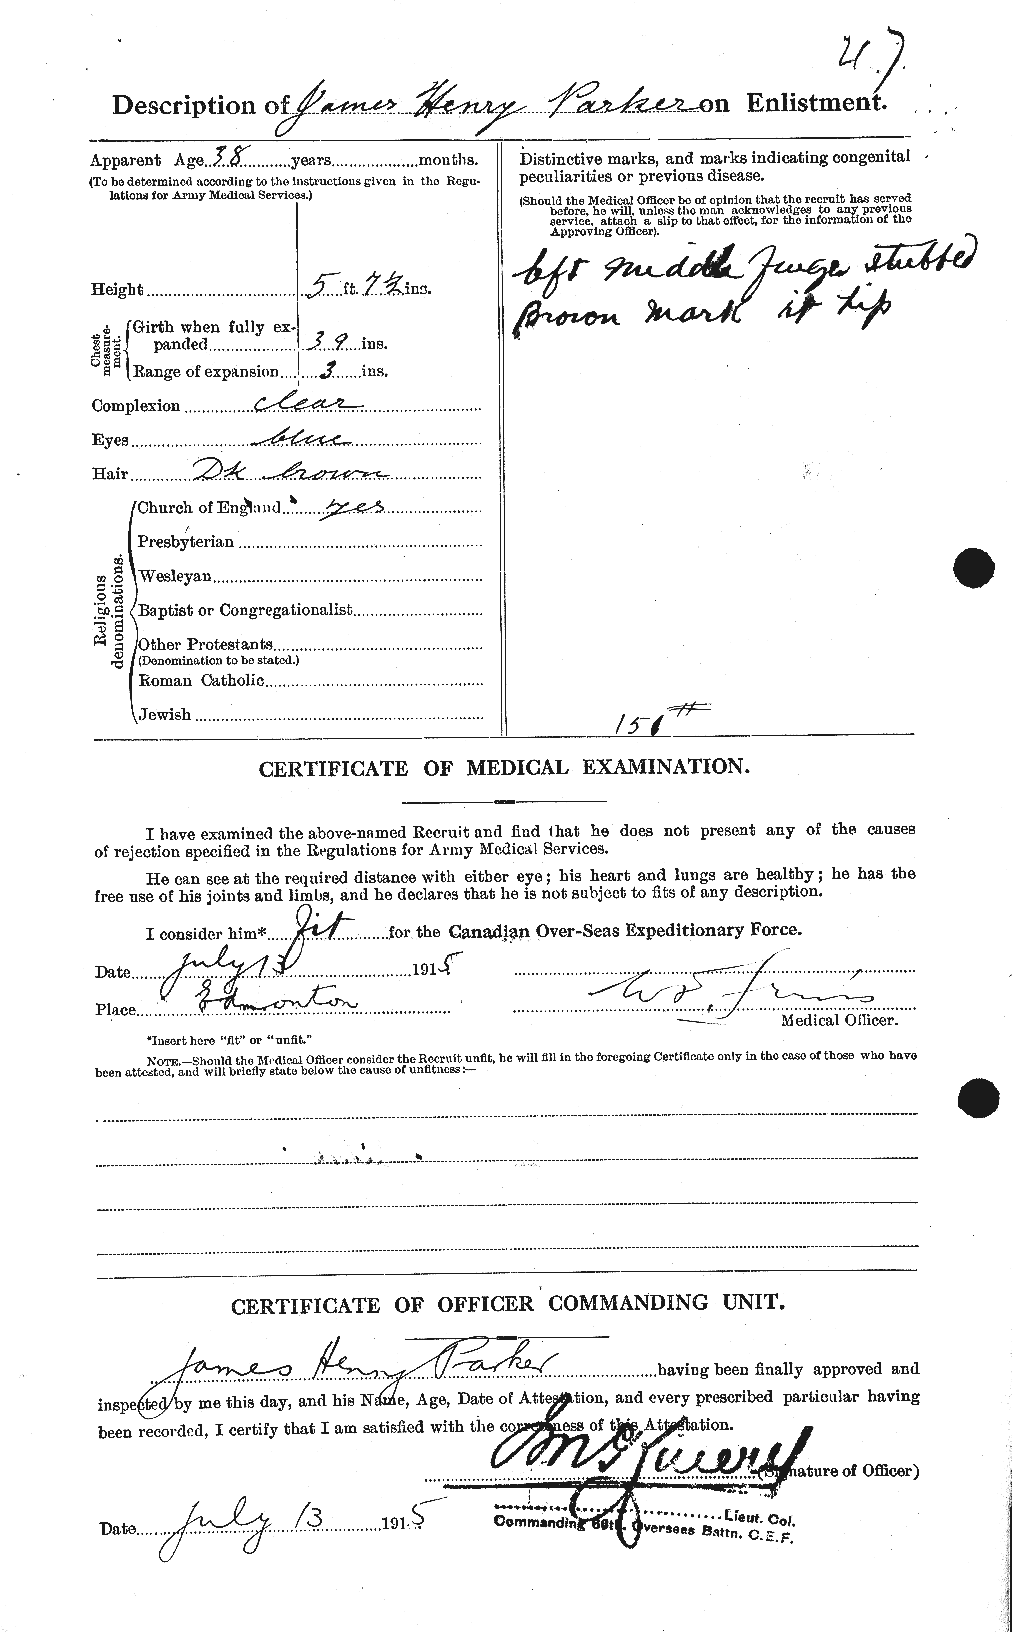 Personnel Records of the First World War - CEF 565431b